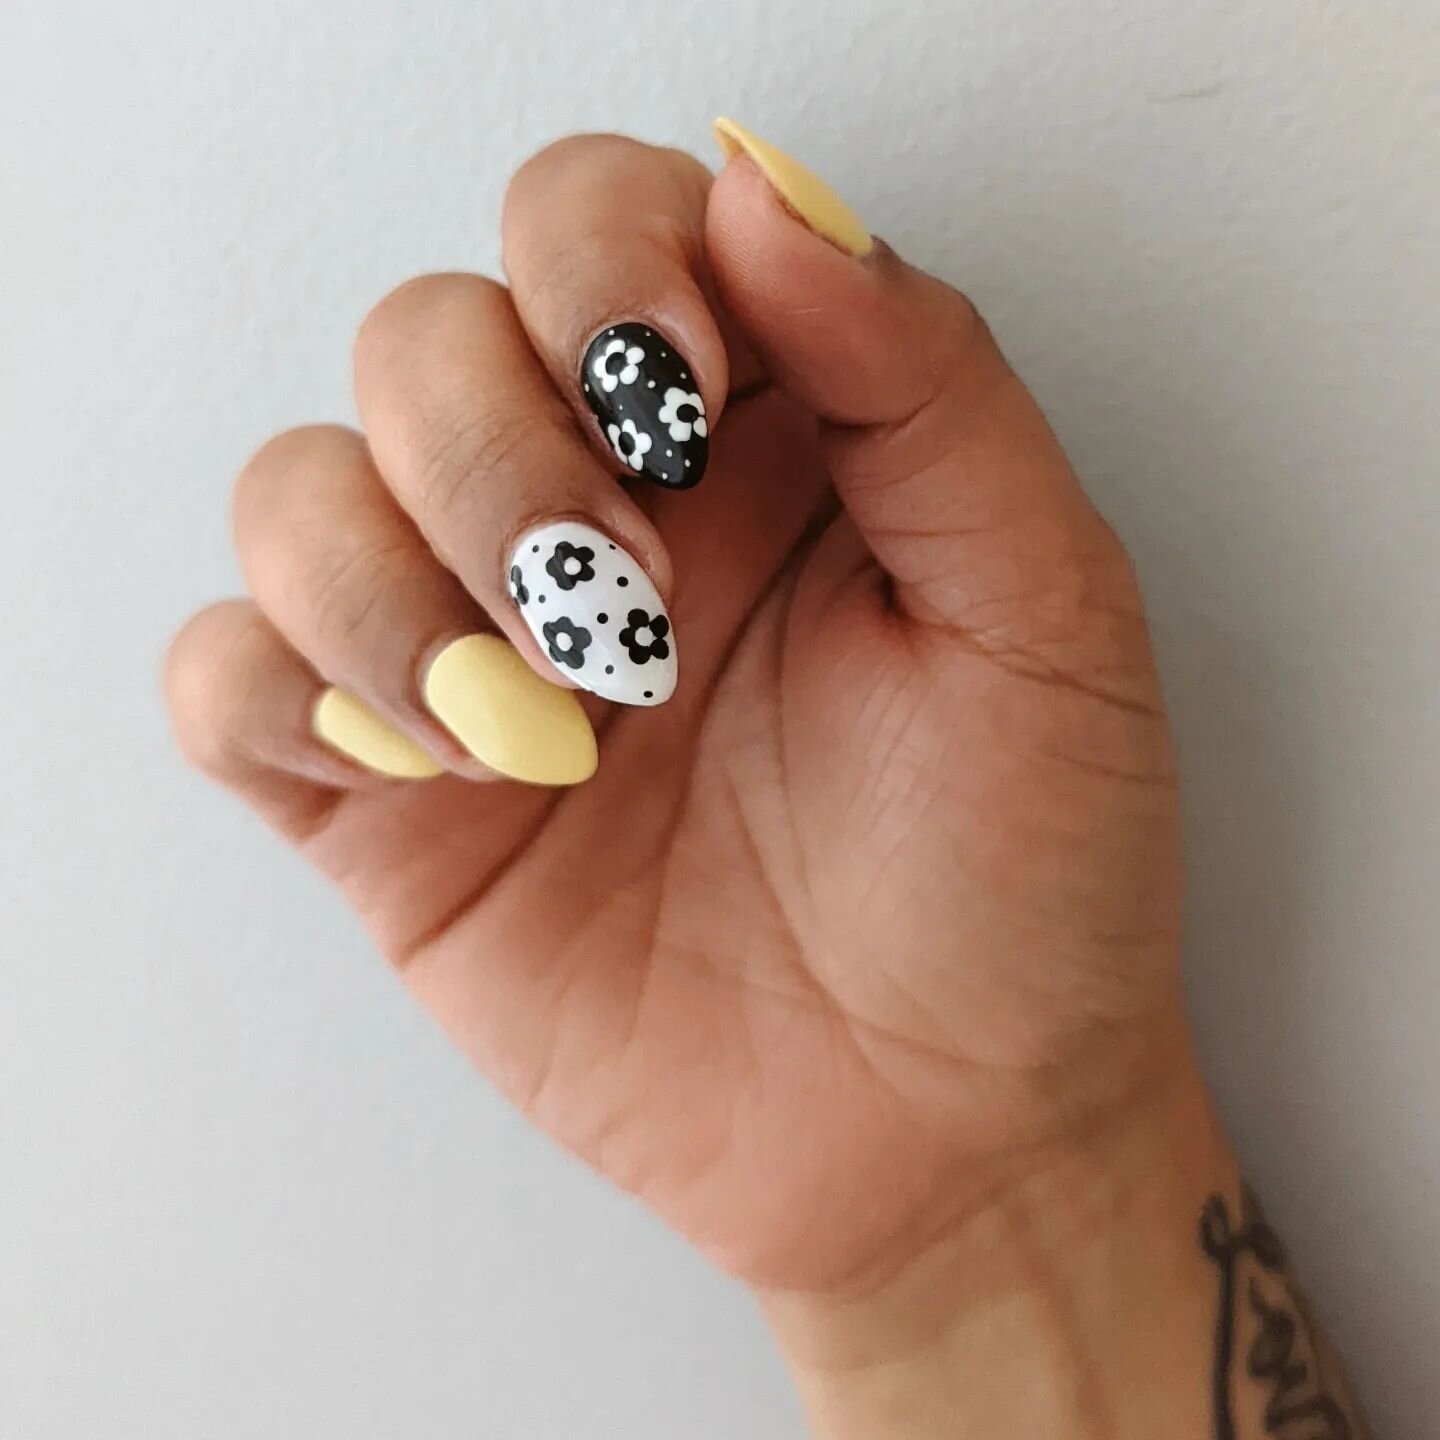 A little groovy flower power, the black and white accents will look good with any colour!

#retreatyourself #manioftheday #naturalnails #torontogelnails #torontonailart #nailitdaily #floralnails #daisynails #yellownails